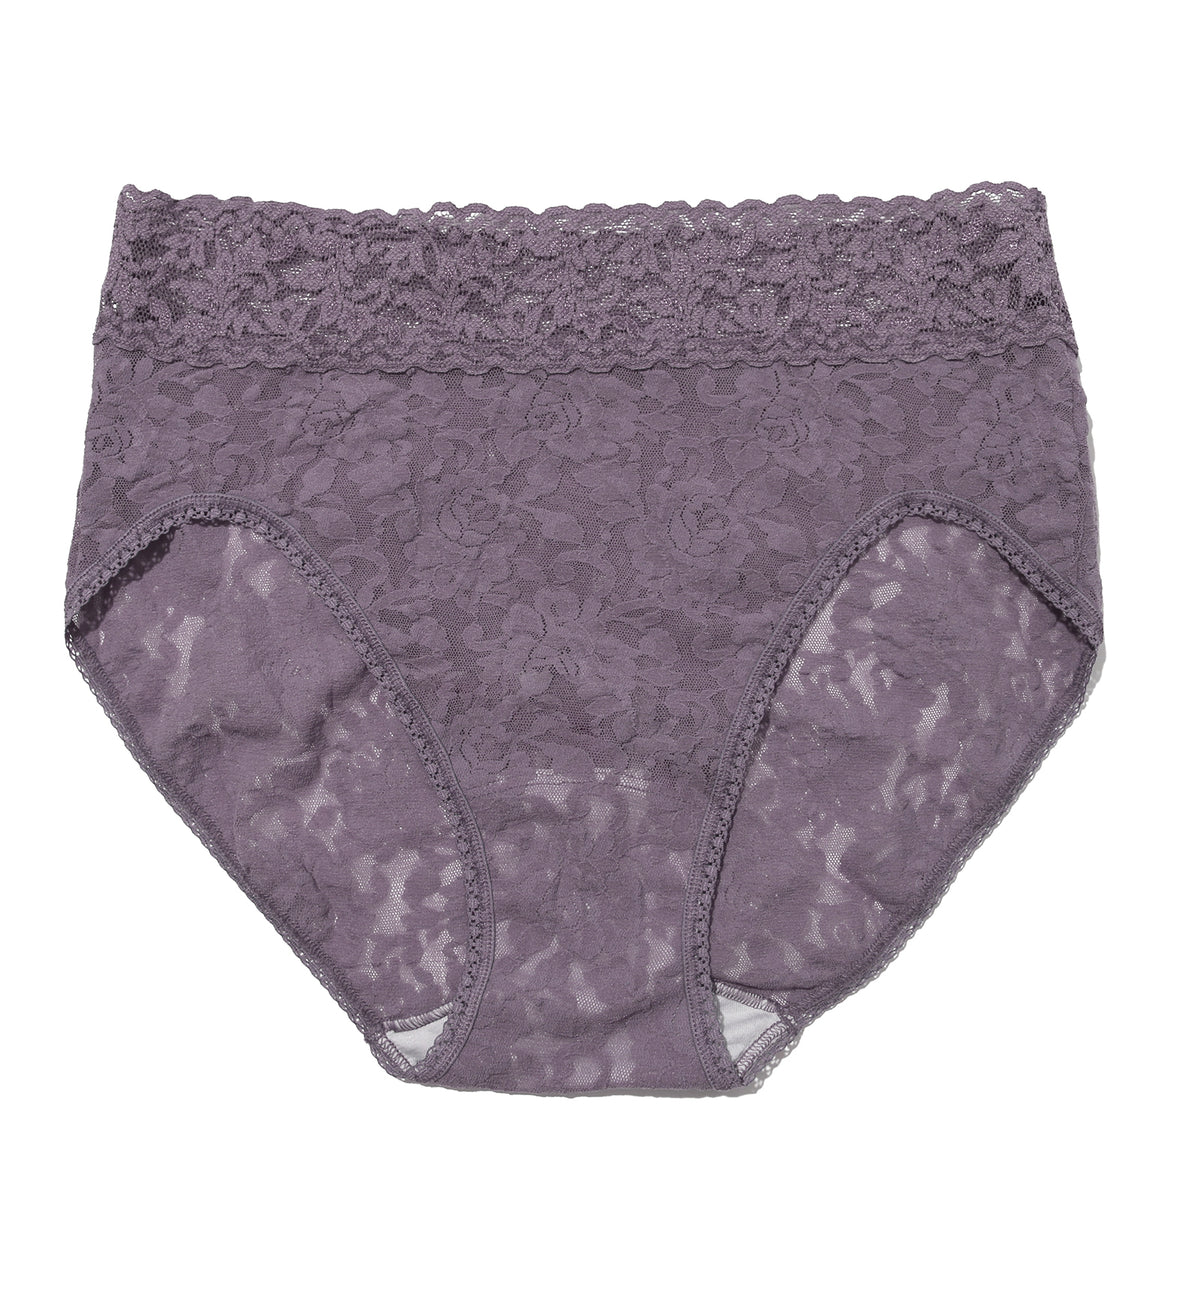 Hanky Panky Signature Lace French Brief (461),Small,Dusk - Dusk,Small